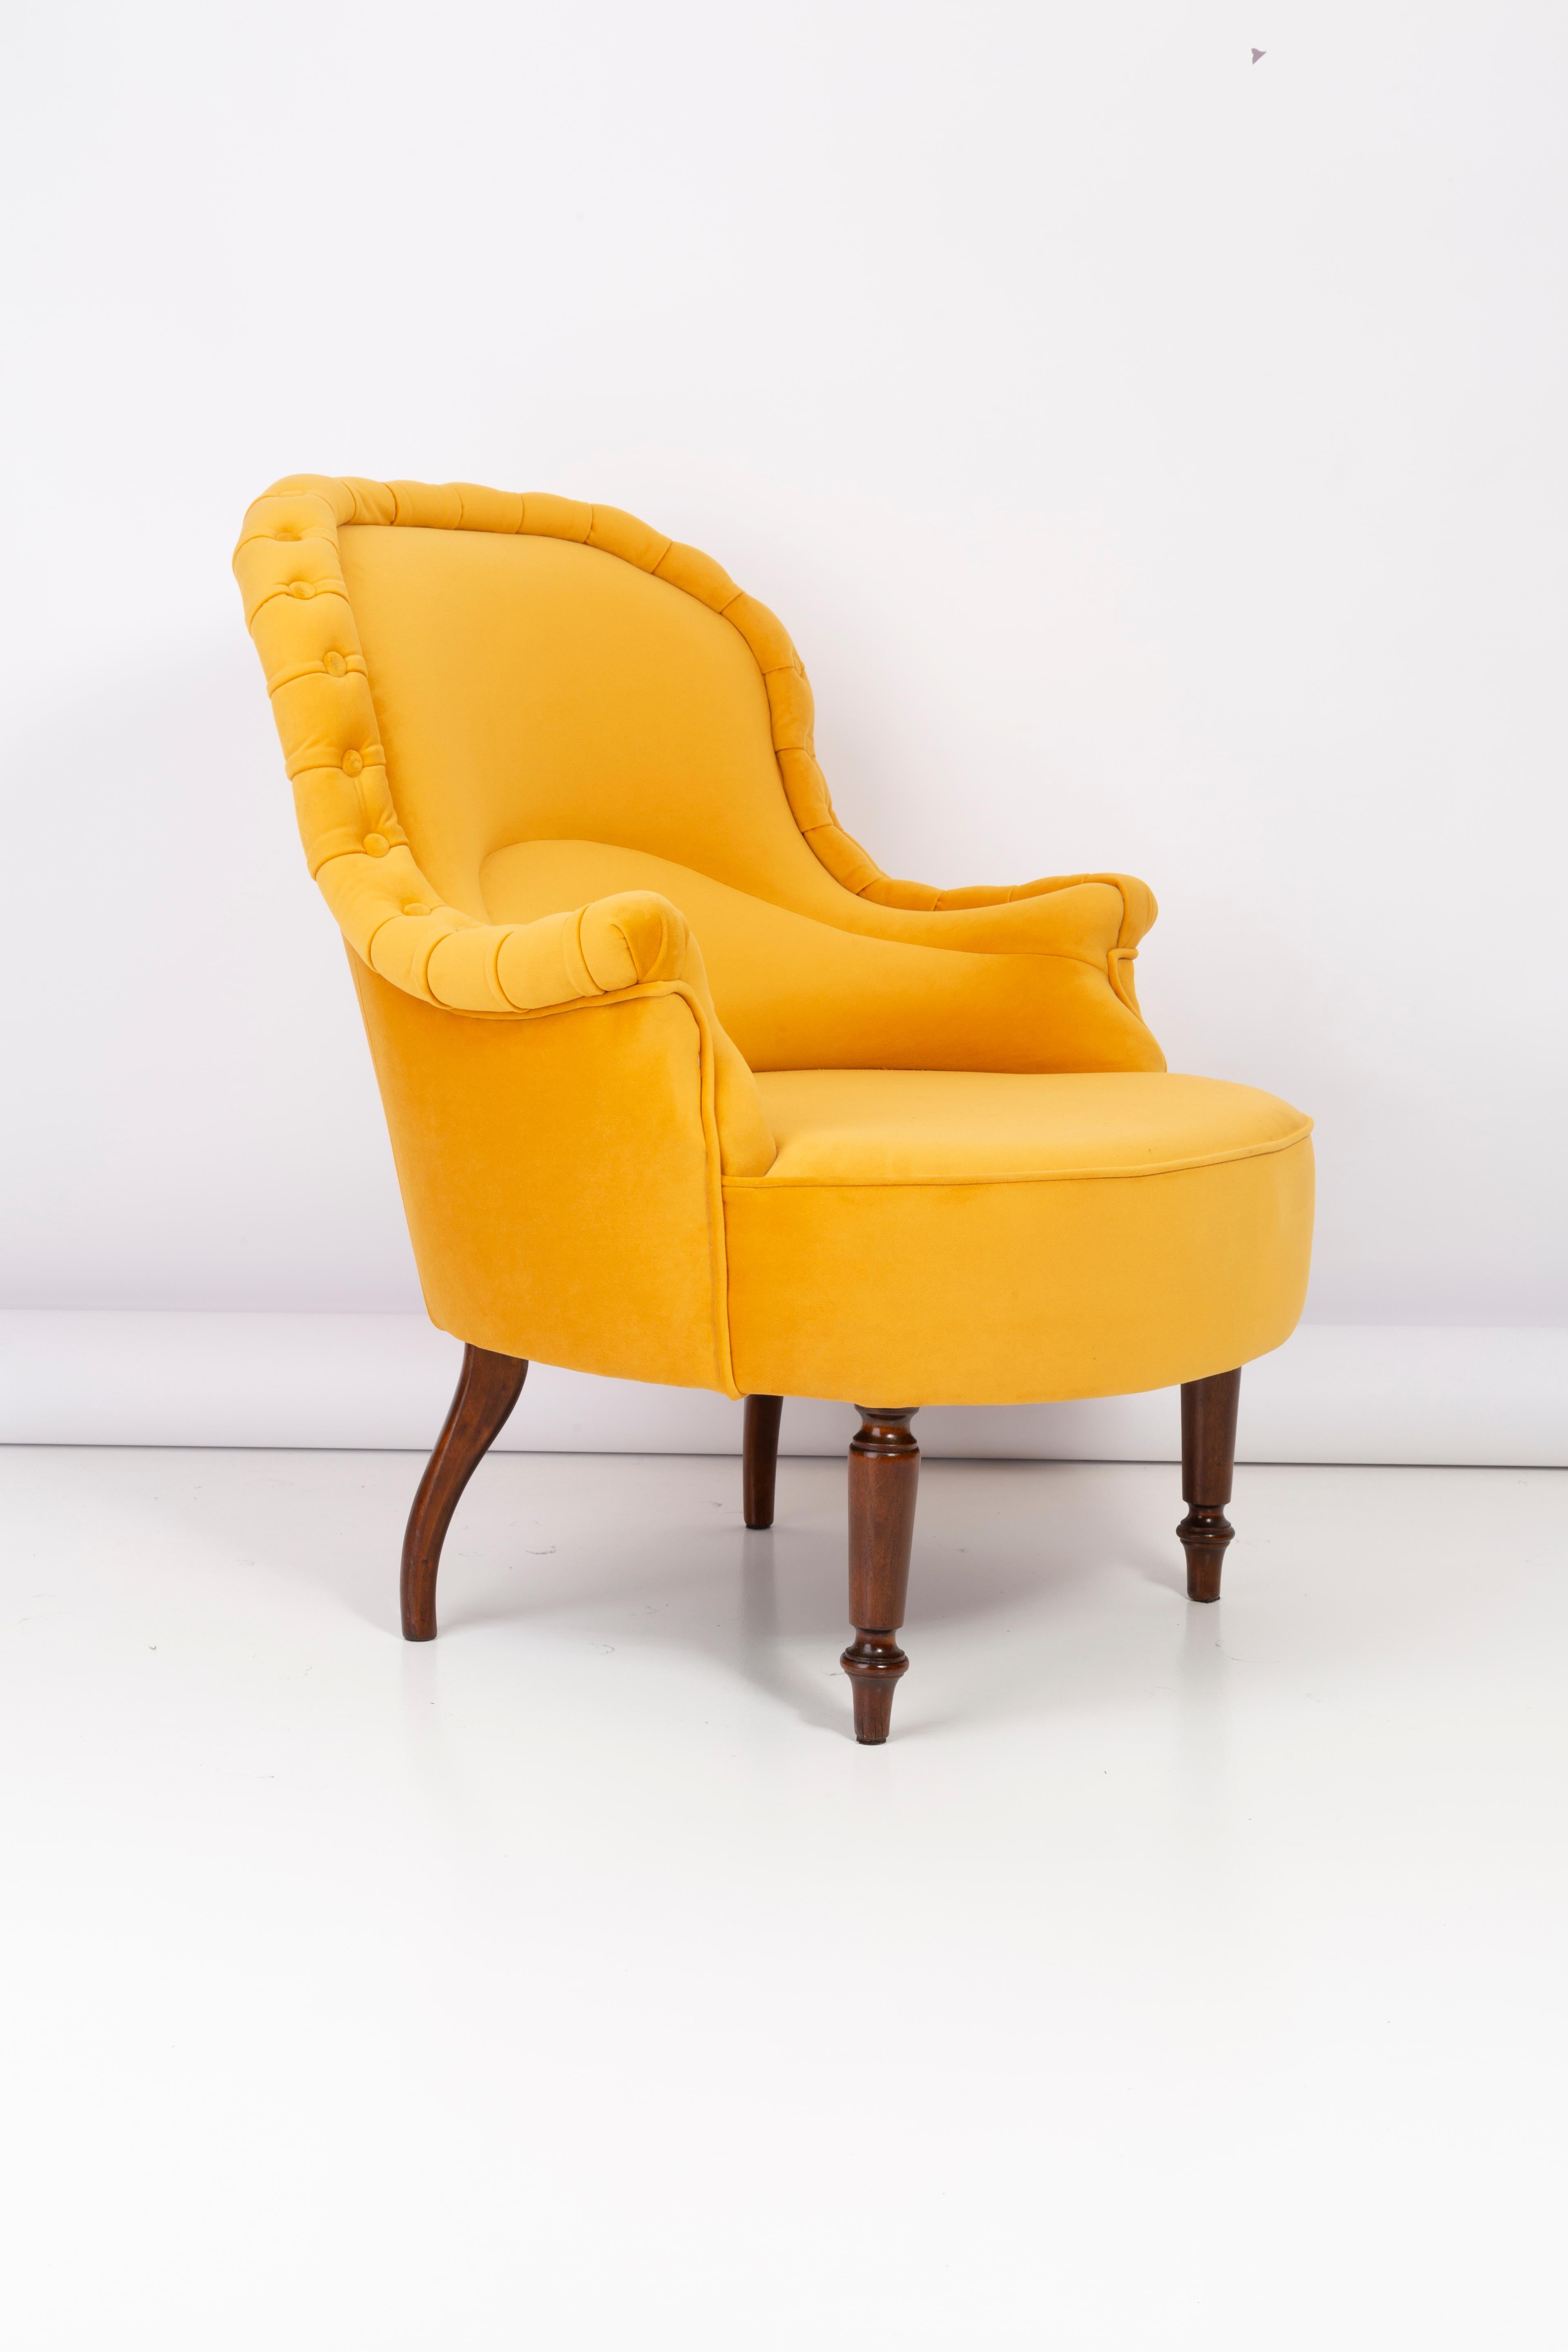 20th Century Pair of Unique Yellow Mustard Armchairs, 1930s, Germany For Sale